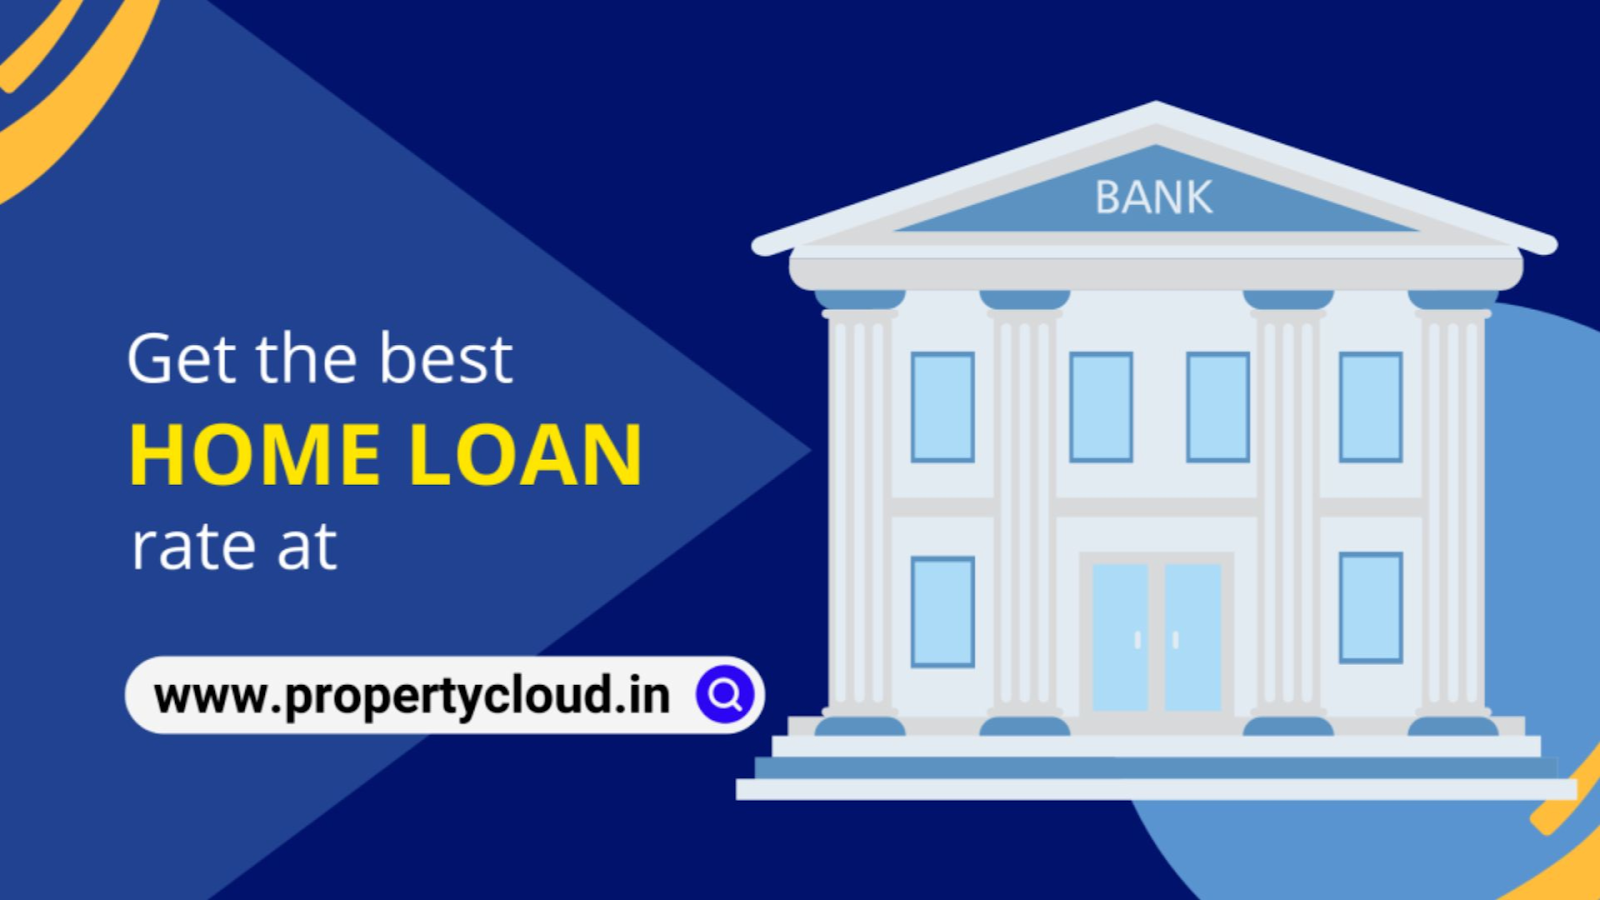 Get in touch with PropertyCloud, to get the best advice related to property loans at the best rate of interest.